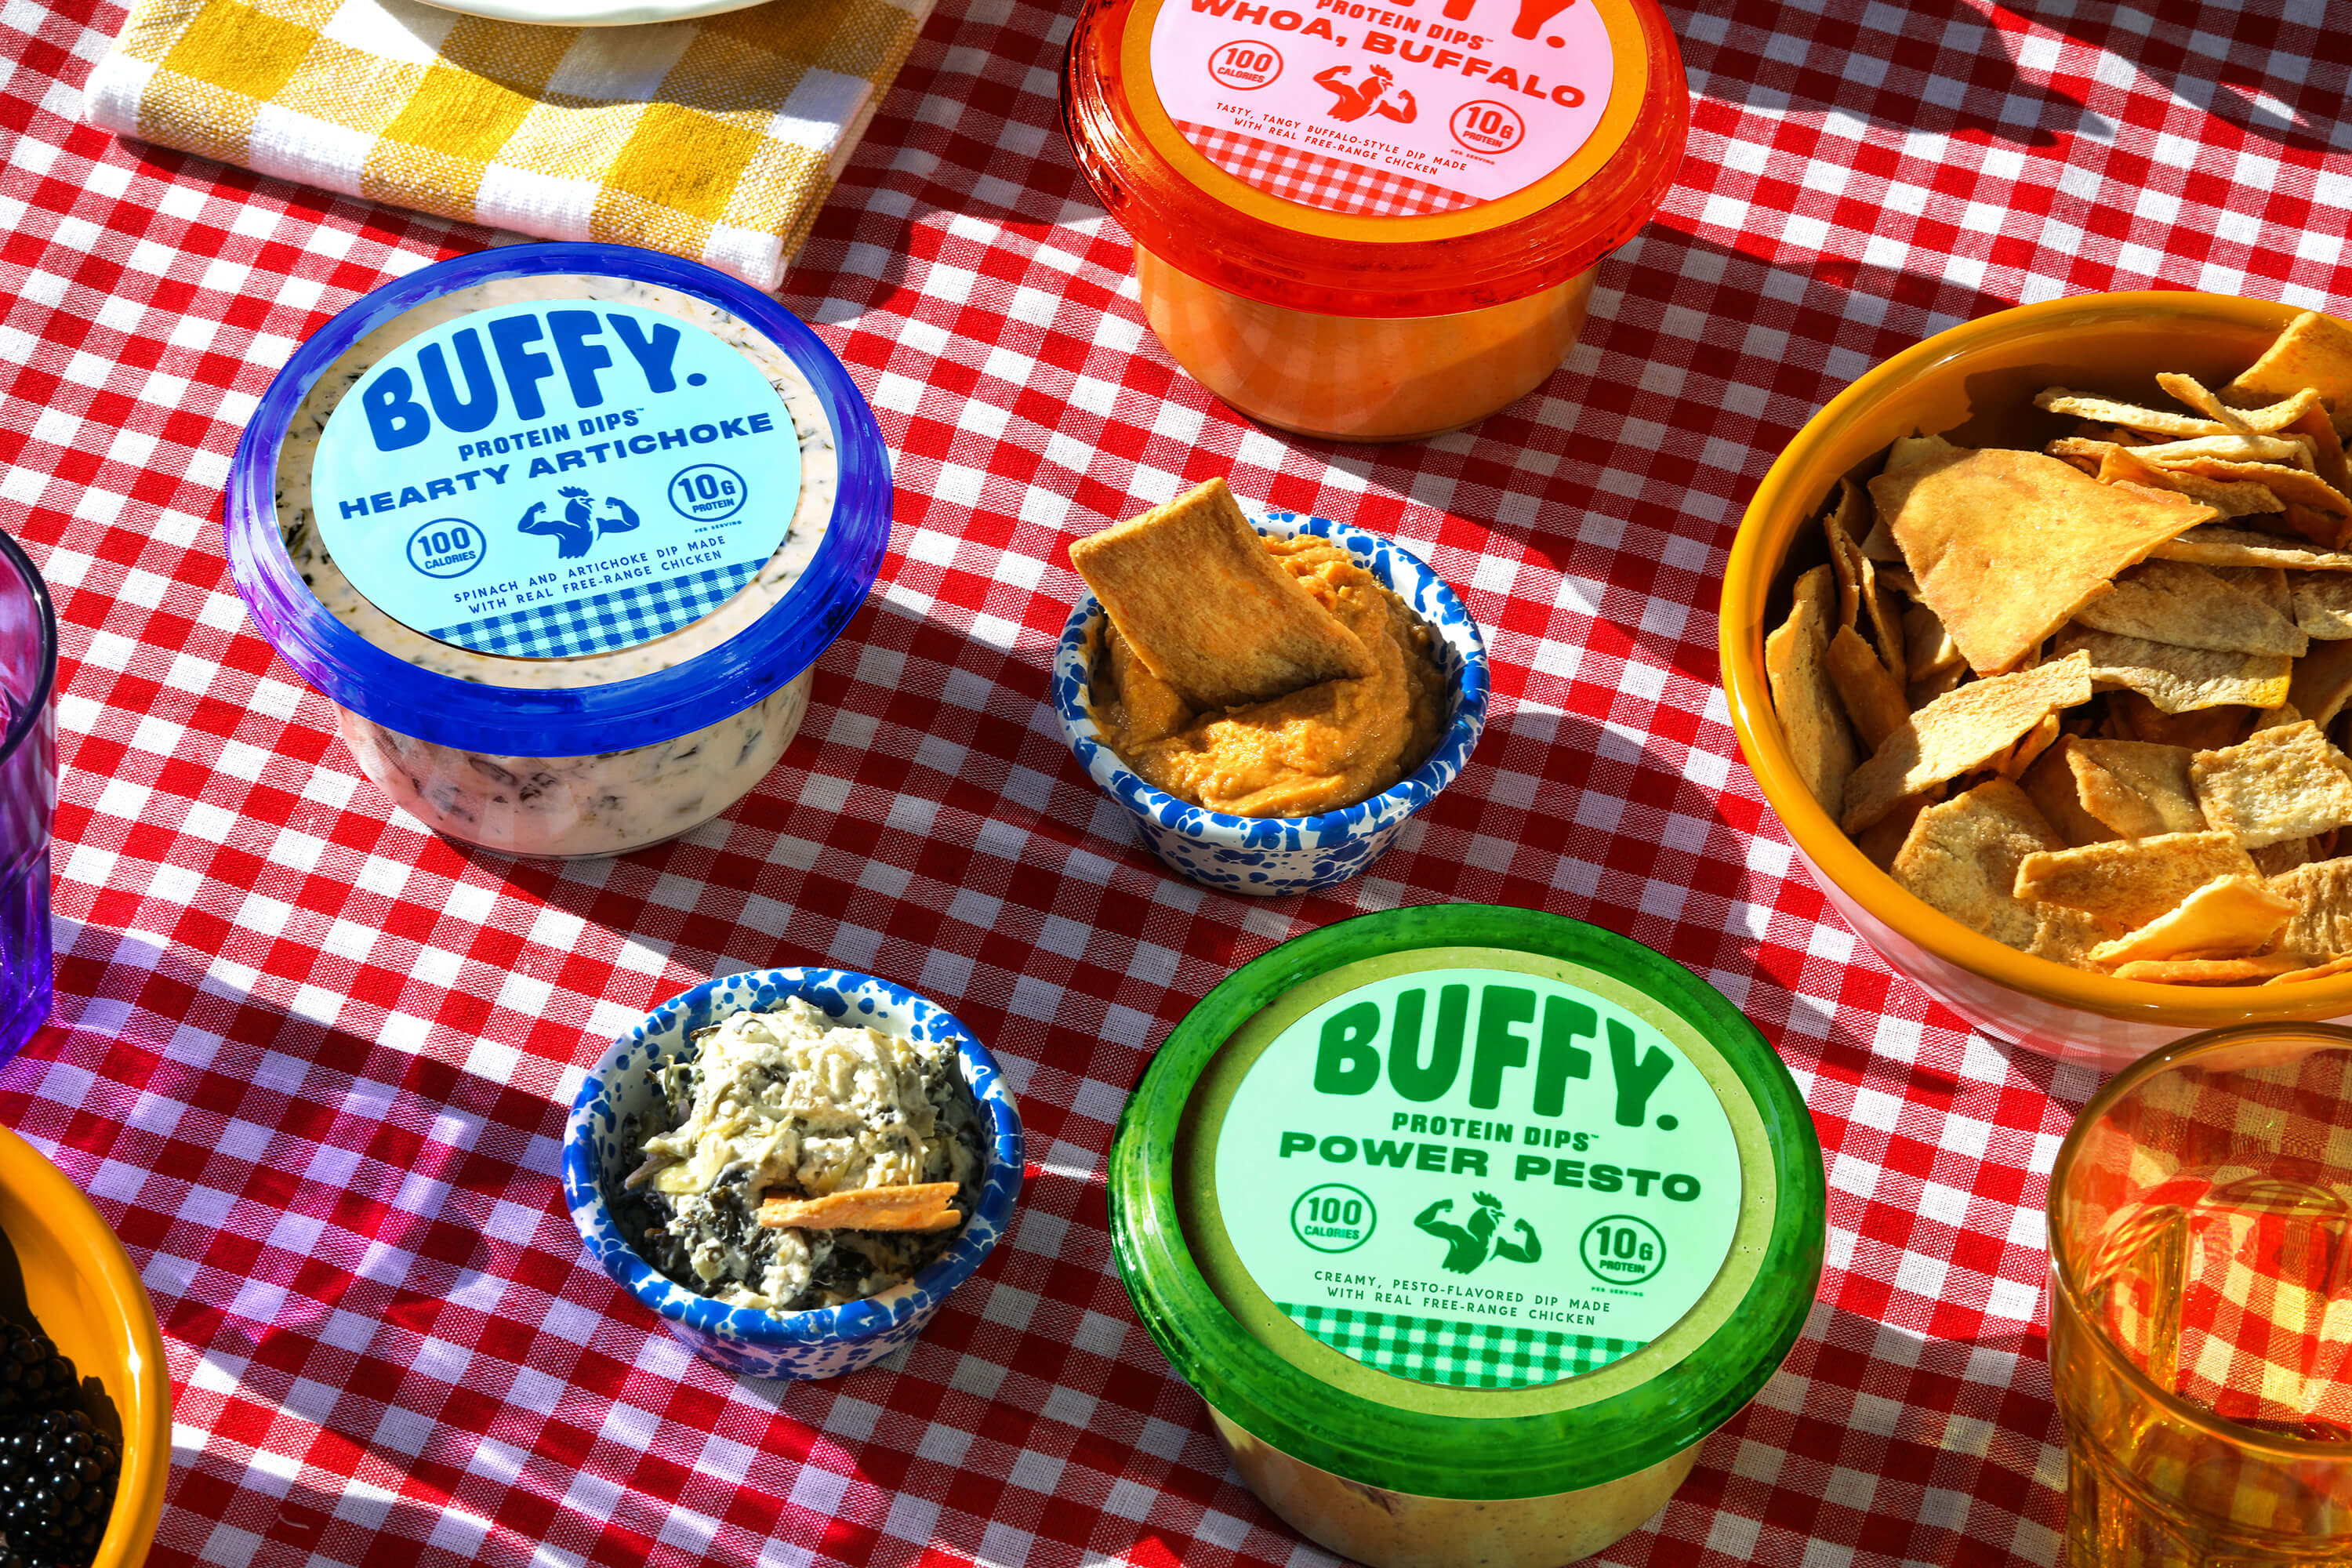 A picnic blanket with all three Buffy Protein Dip flavors, including Whoa, Buffalo, Hearty Artichoke and Power Pesto. The dip is in small containers with a bowl of pita chips next to them.